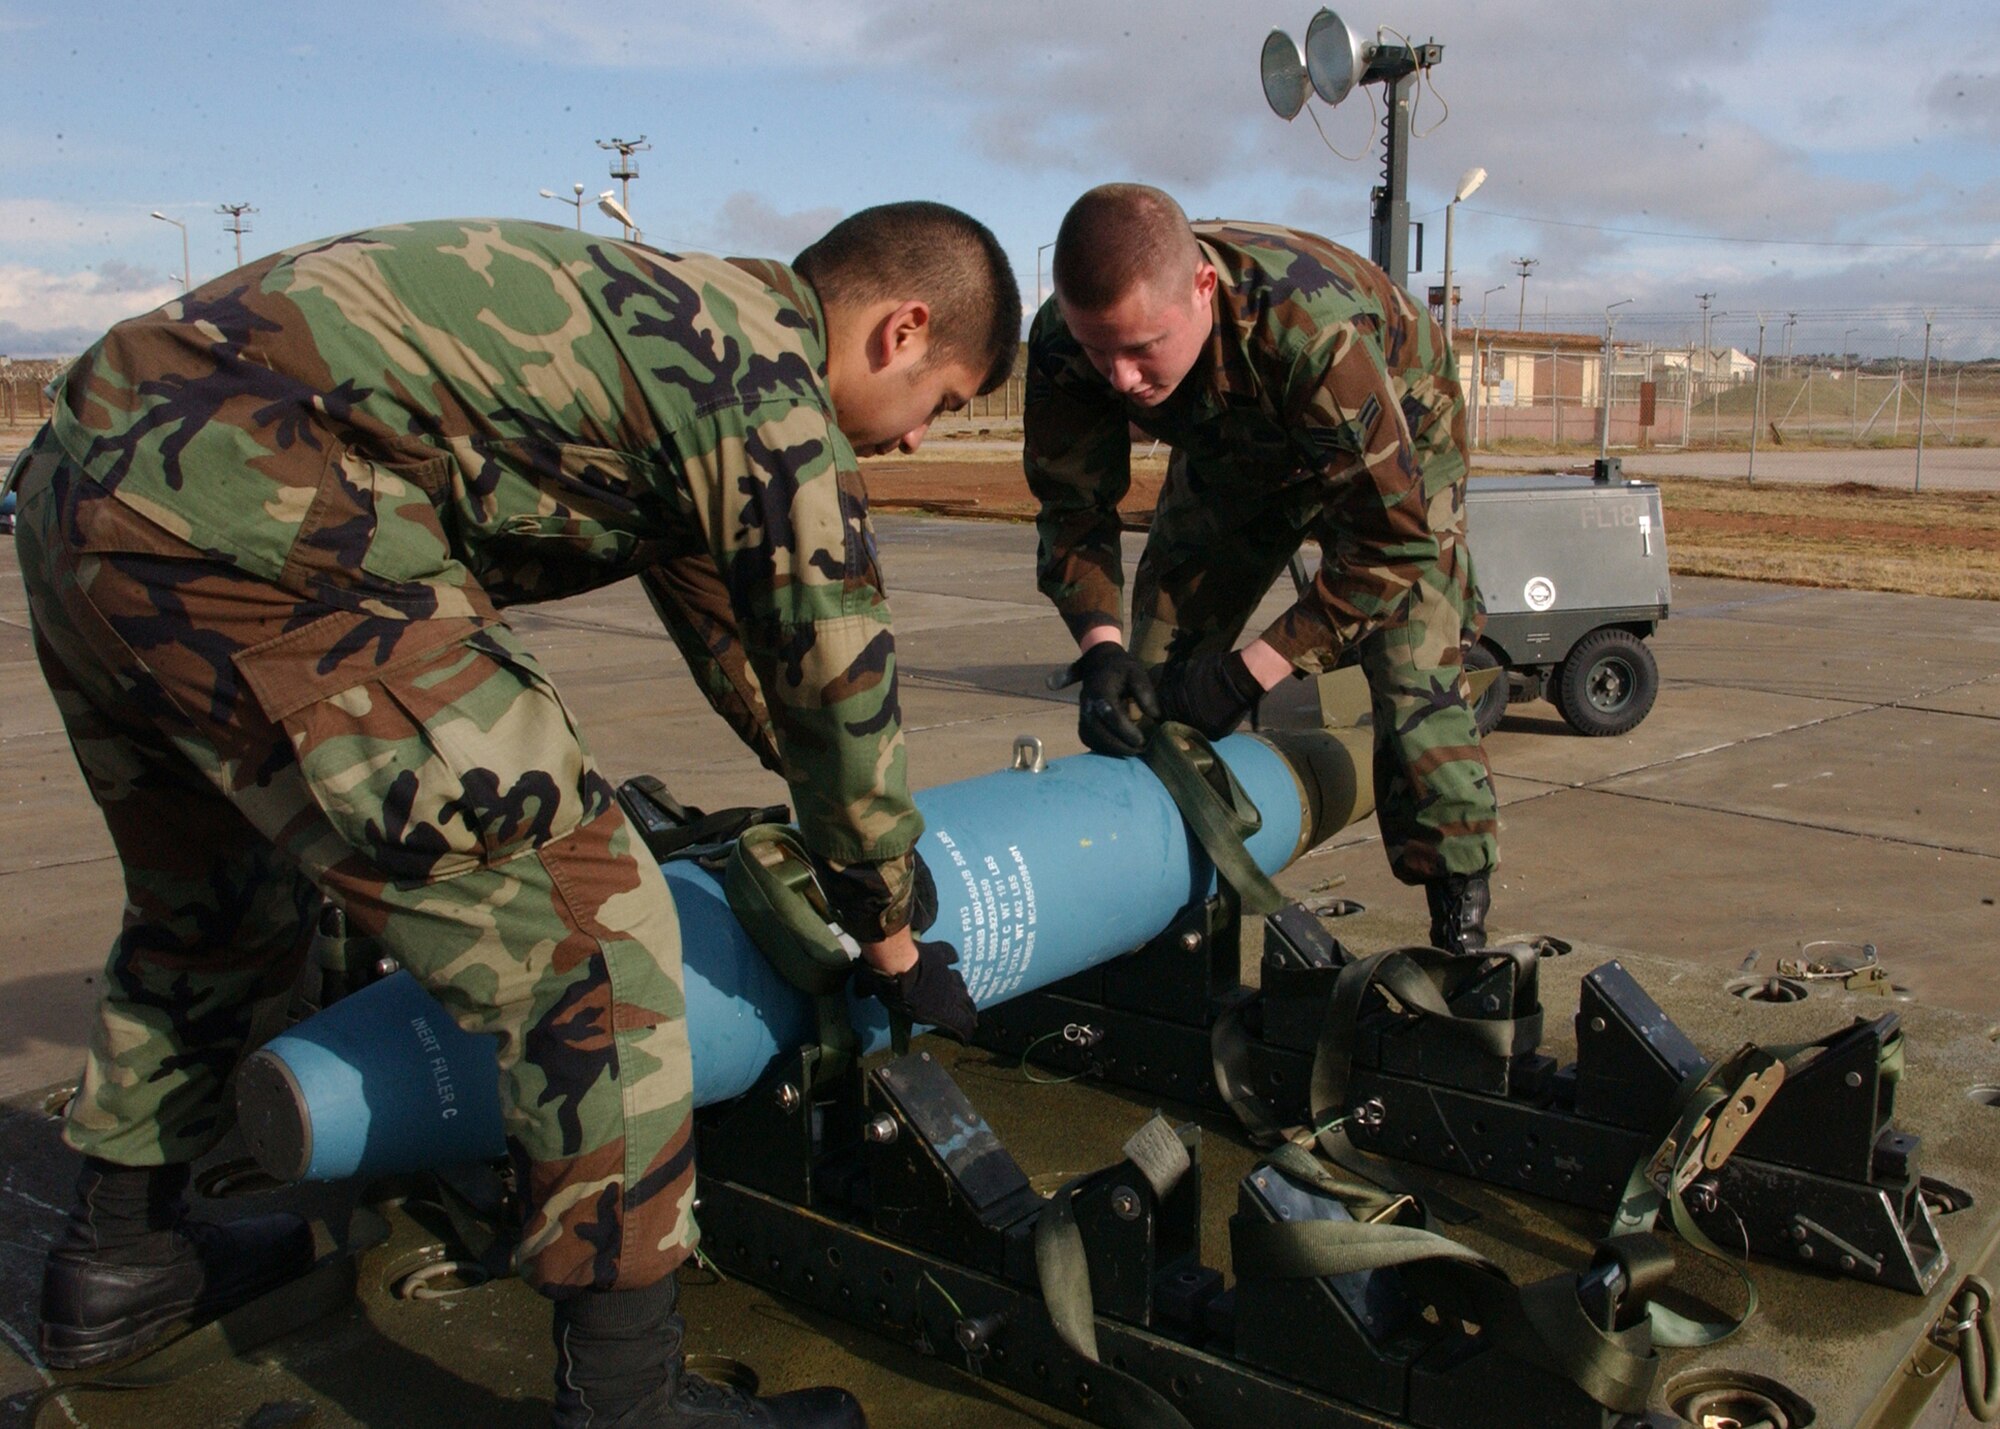 The 22nd Fighter Squadron from Spangdahlem, Germany has increased responsibilities across the board for Incirlik personnel as the first Rotational Squadron Deployment since Operation Northern Watch in the early 1990s. The cooperation between Incirlik and Spangdahlem has improved the initial maintenance development of the 39th Maintenance Squadron ammunition personnel through high-fidelity training opportunities. (U.S. Air Force photo by Airman 1st Class Tim Taylor)